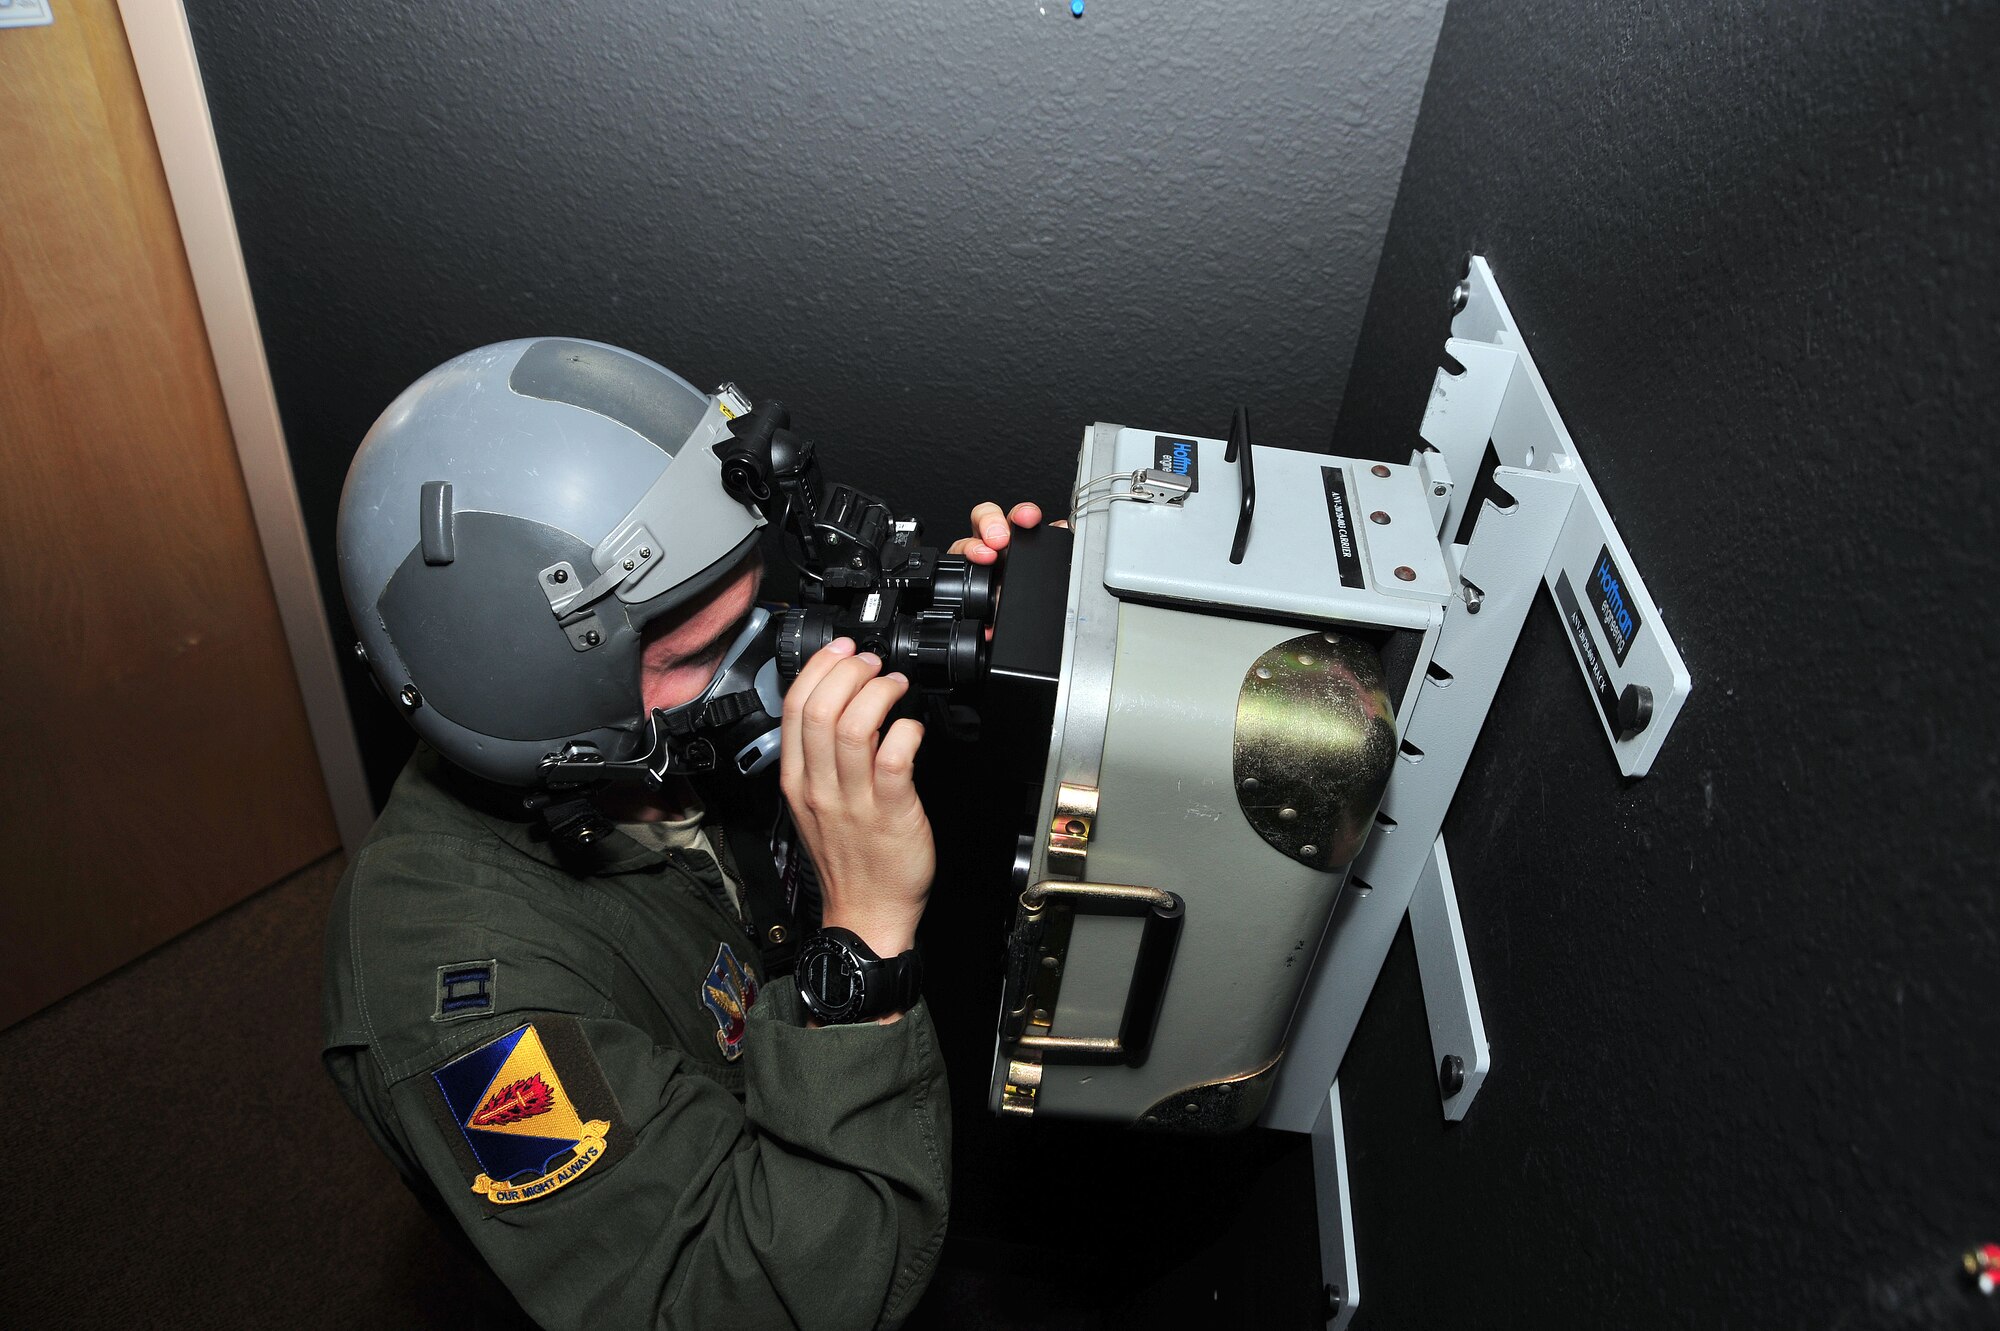 U.S. Air Force Capt. Brent Fleming, 355th Operations Group pilot, tests his night vision goggles before his flight at Davis-Monthan Air Force Base, Ariz., Nov. 7, 2013. Prior to flight, all equipment must be inspected for operability.(U.S. Air Force photo by Senior Airman Josh Slavin/Released)